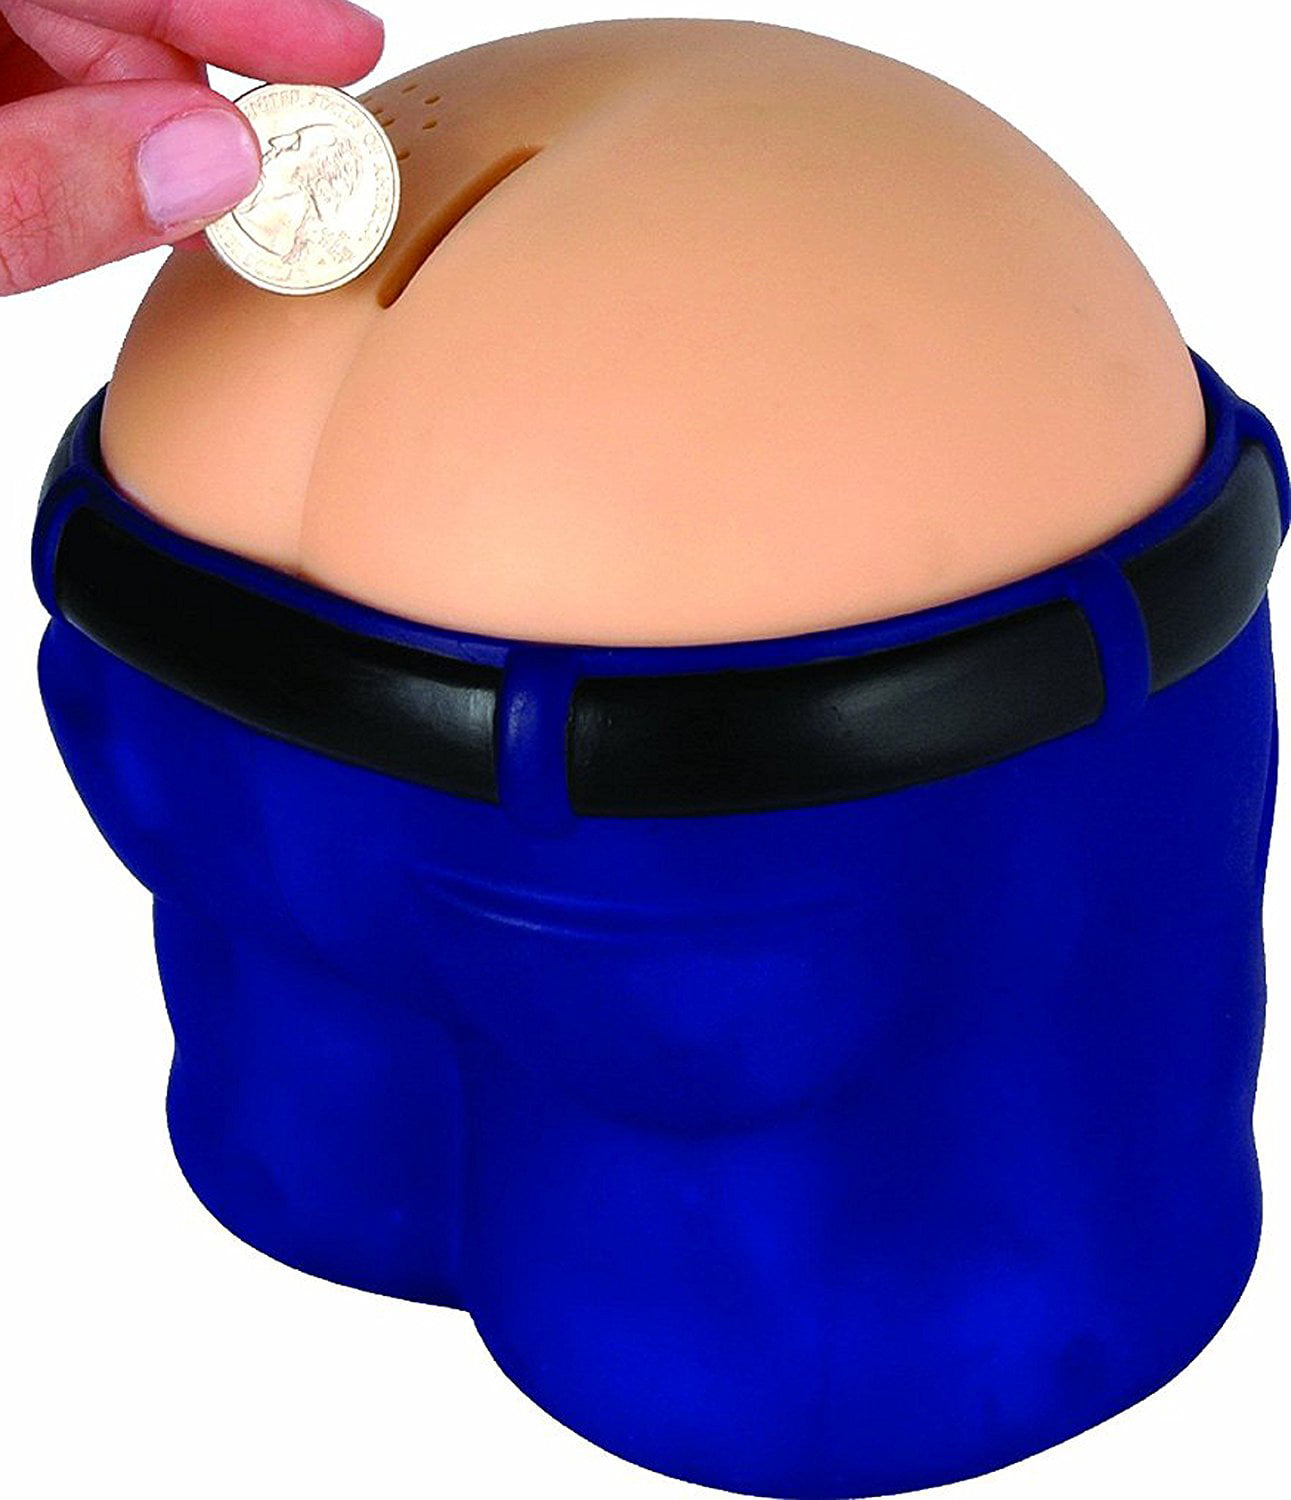 Funny Fanny Farting Bank Gag Gift Coin Bank Shaped Like Fanny Coin Makes Farting 